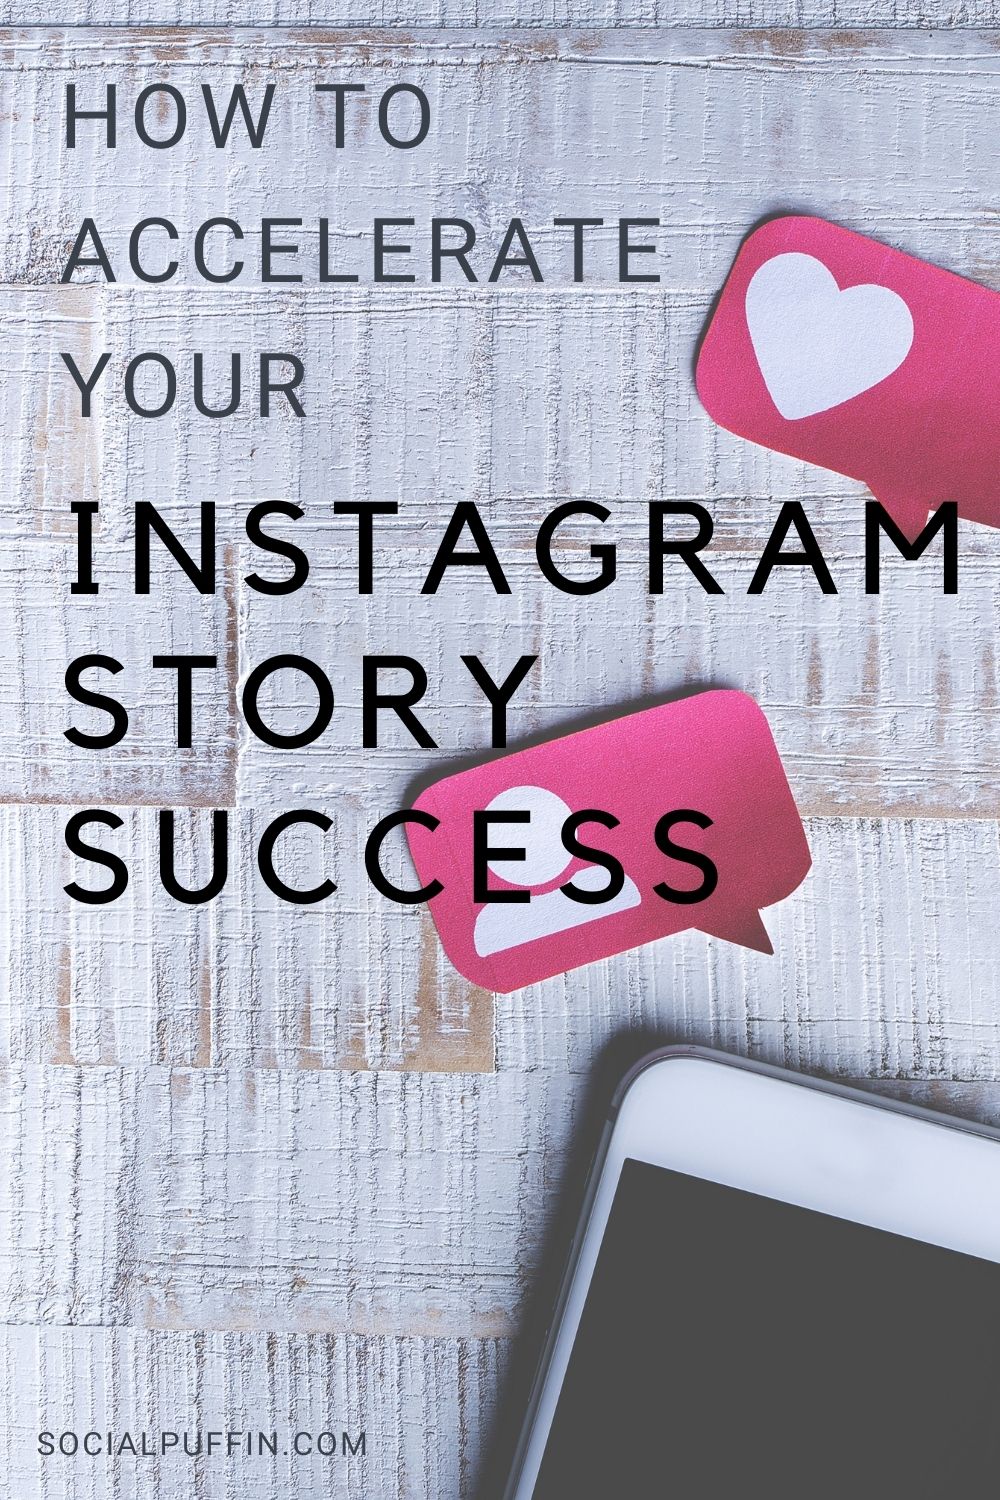 How to Accelerate Your Instagram Story Success - Social Puffin